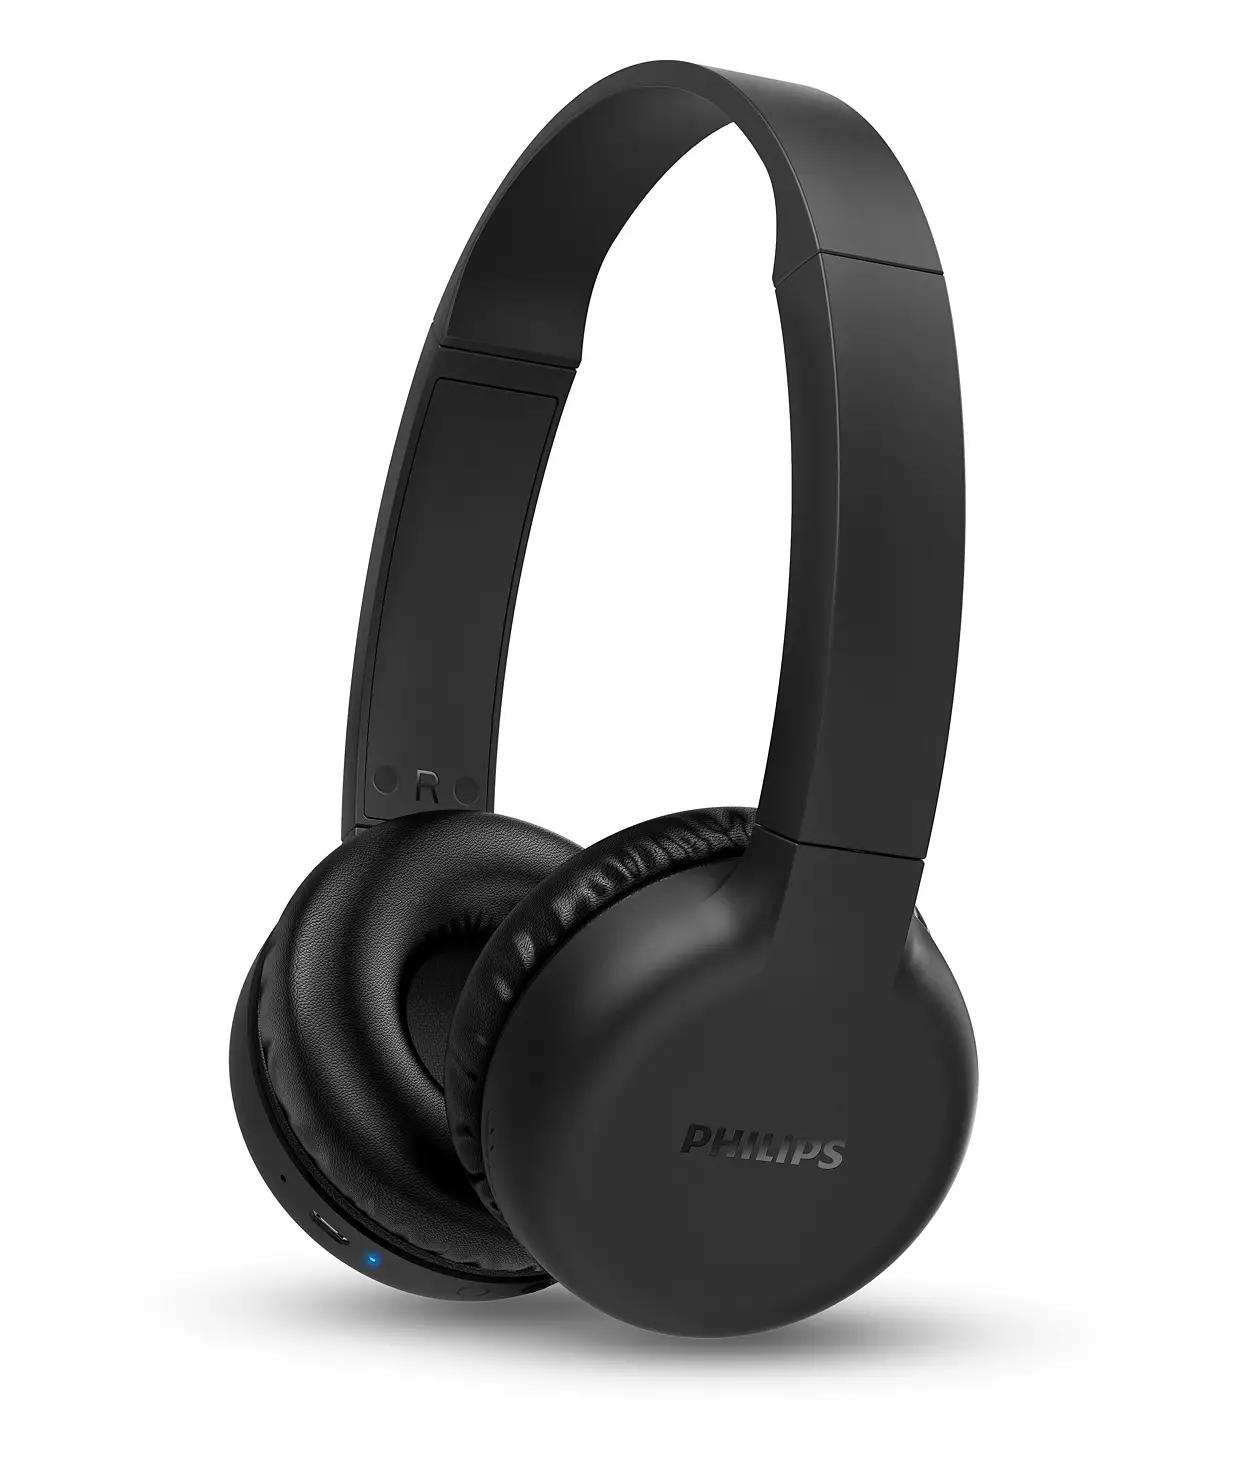 AURICULARES PHILIPS TAH1205 NEGRO ON EAR BLUETOOTH